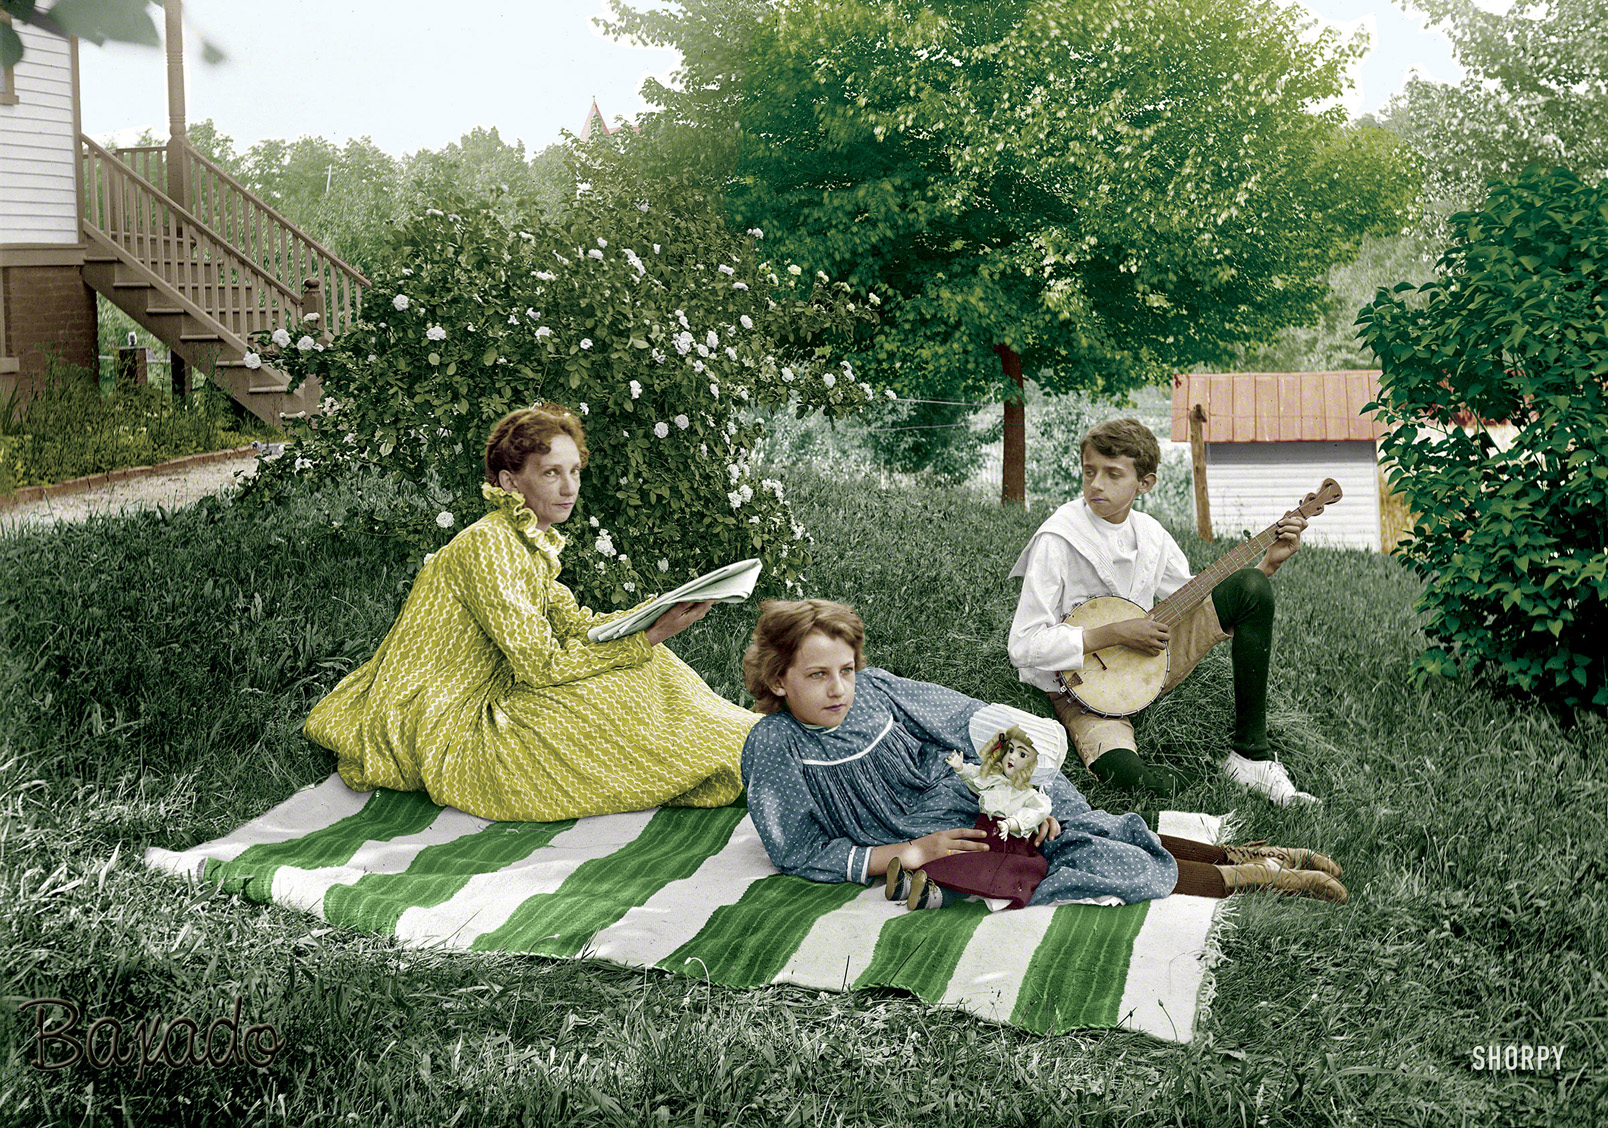 Colorized from this Shorpy original. When I saw this, I just had to colorize it. Whilst I was in the process, I found on closer view that Helen had a ring on her finger. View full size.